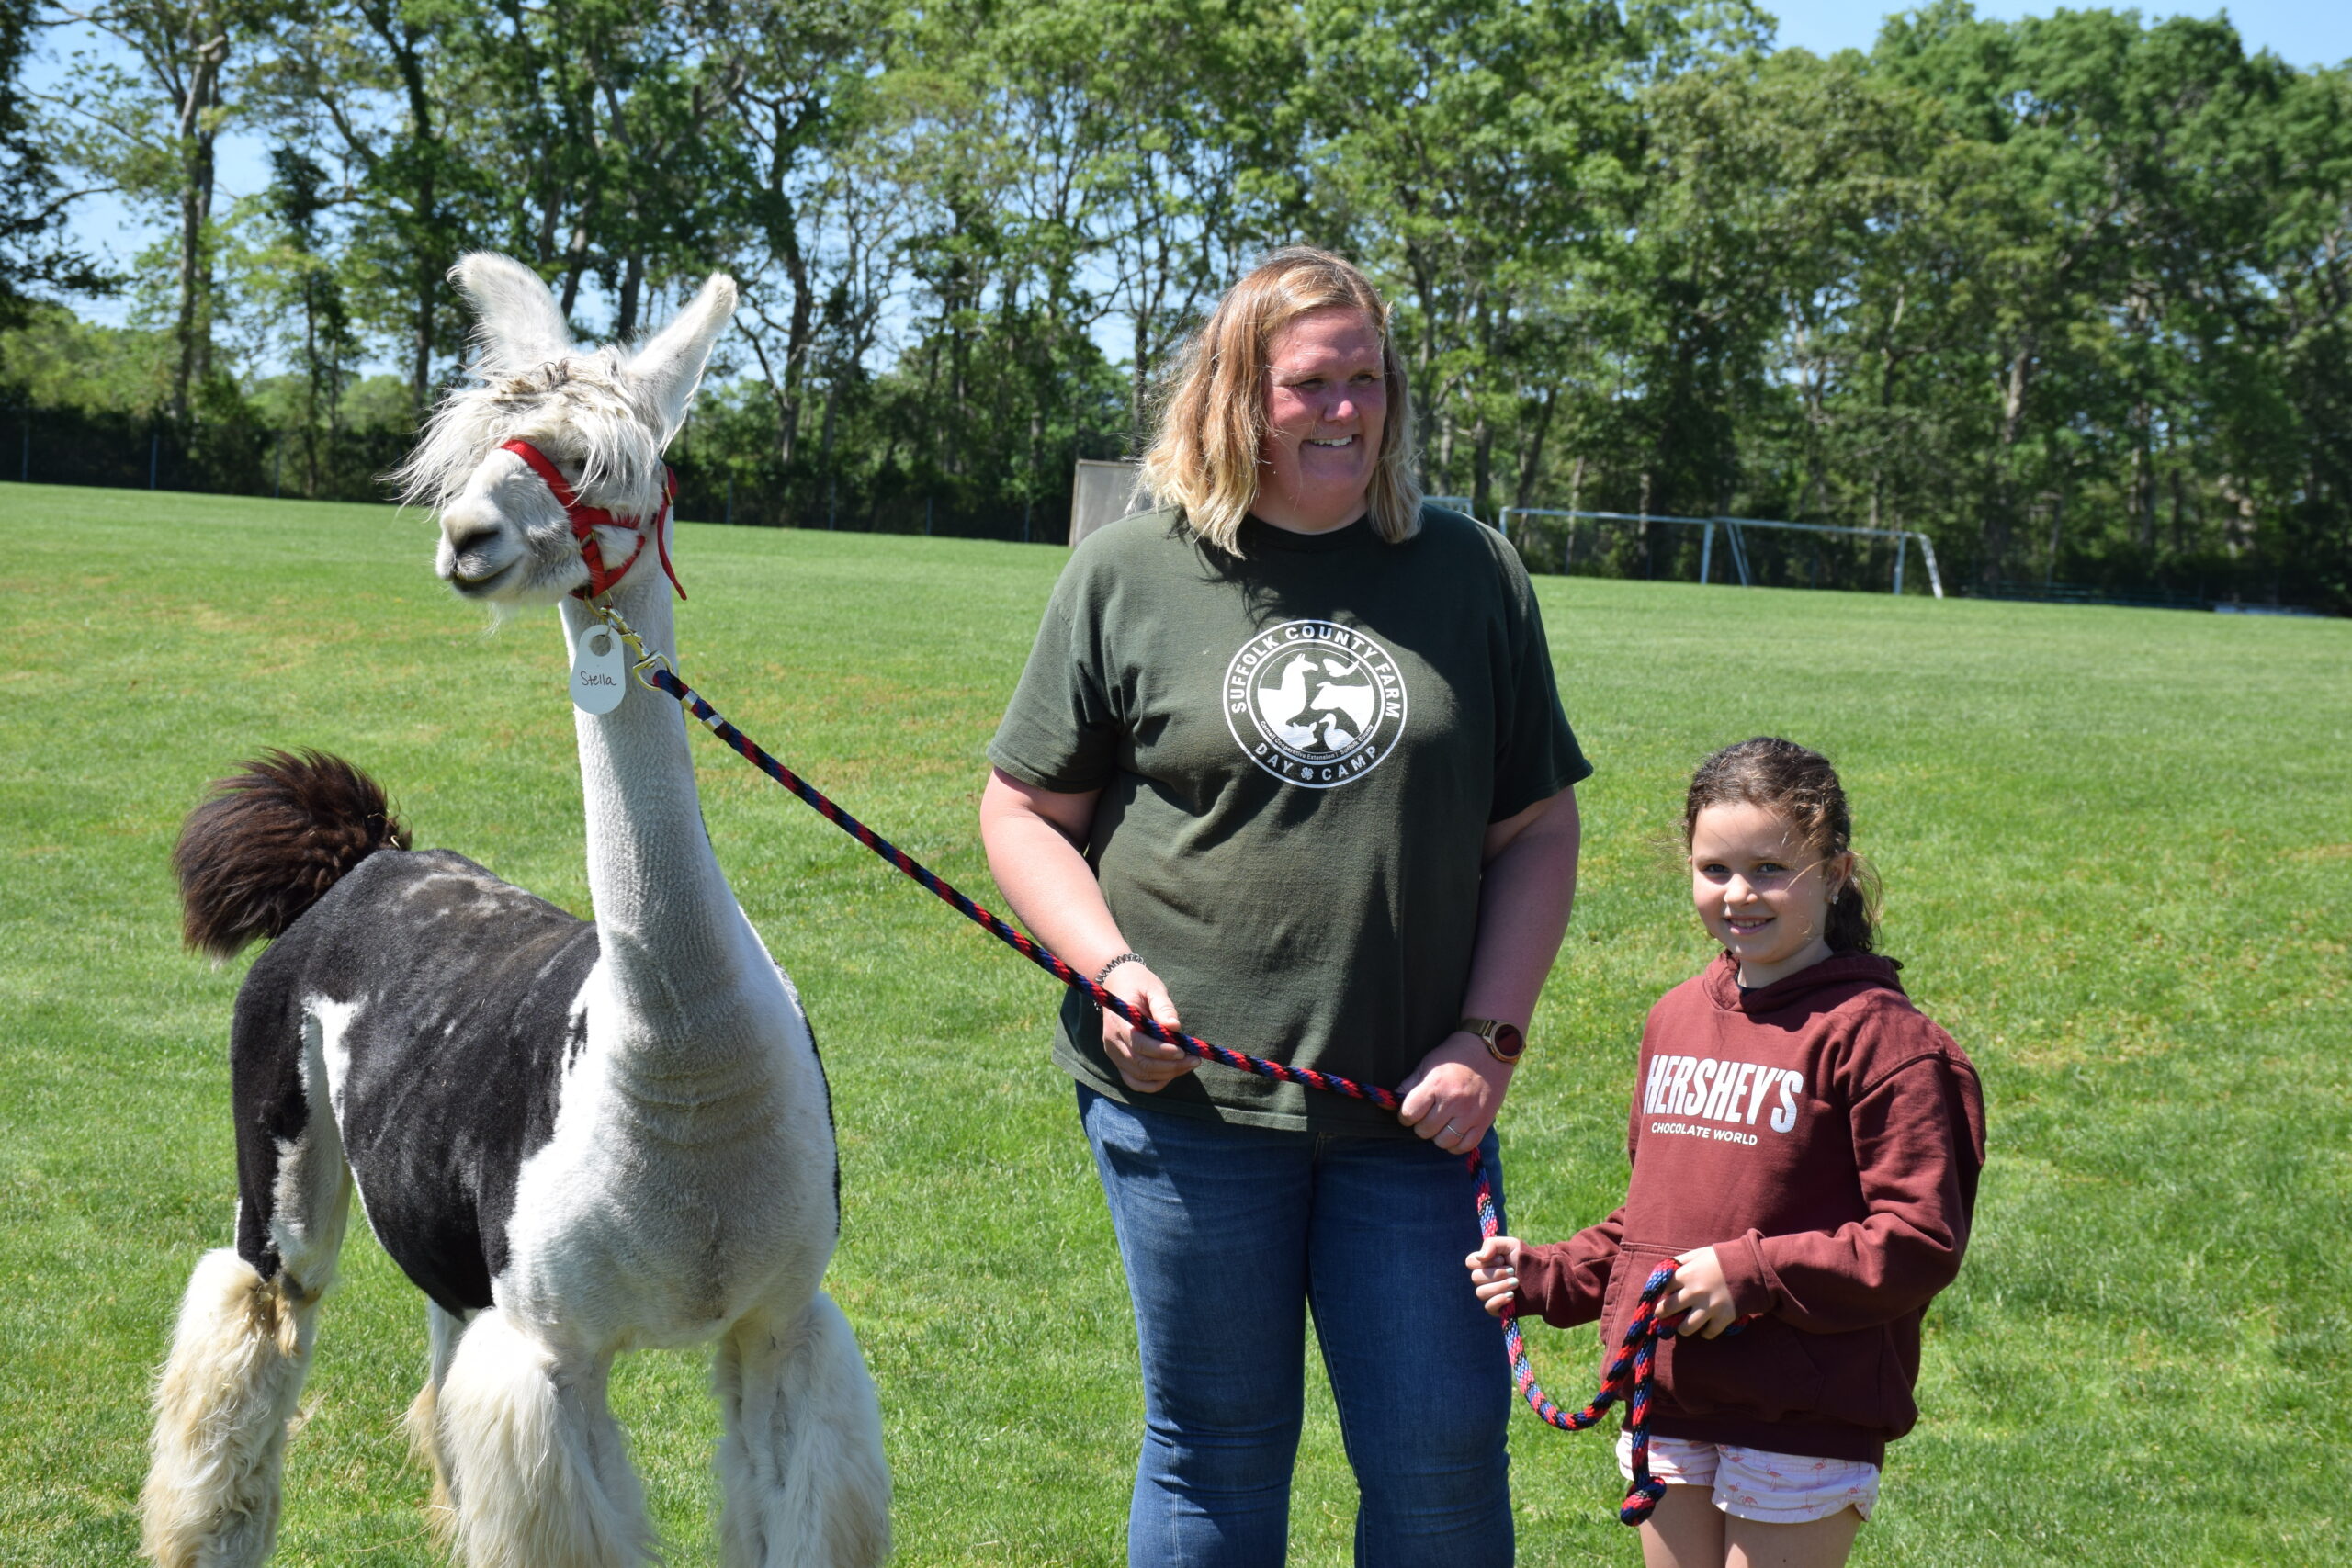 Third grade students, including Mary Kate Breen, at Westhampton Beach Elementary School were recently introduced to two friendly llamas from the Suffolk County Farm and Education Center. Before giving the students an opportunity to walk the llamas around the school’s grounds, educators from the center spoke to them about llama habitats, behavior and usefulness.  COURTESY WESTHAMPTON BEACH SCHOOL DISTRICT